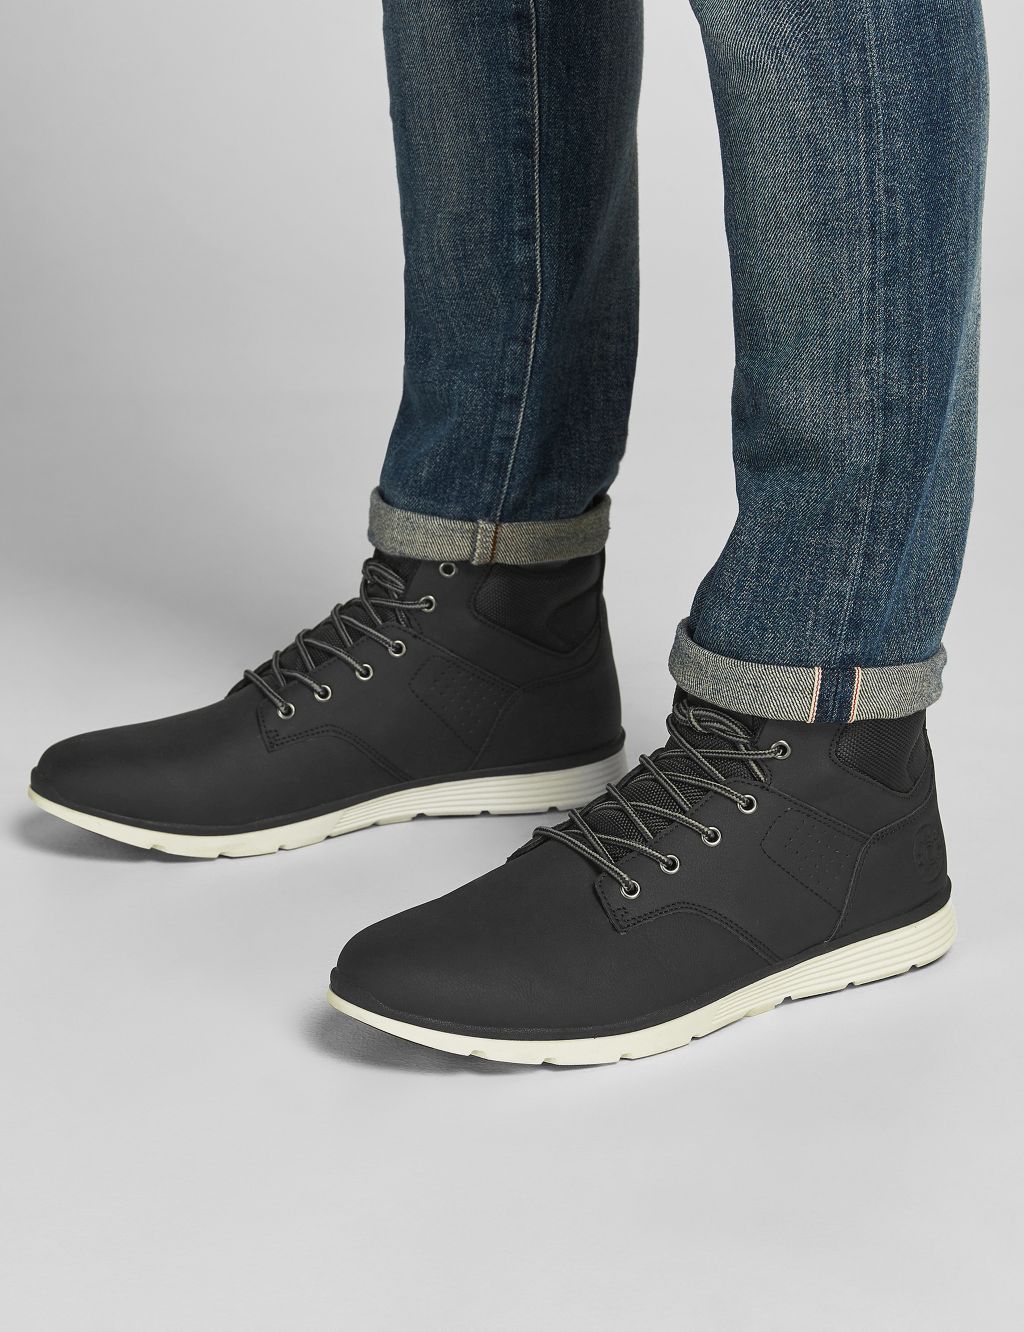 Casual Boots image 1